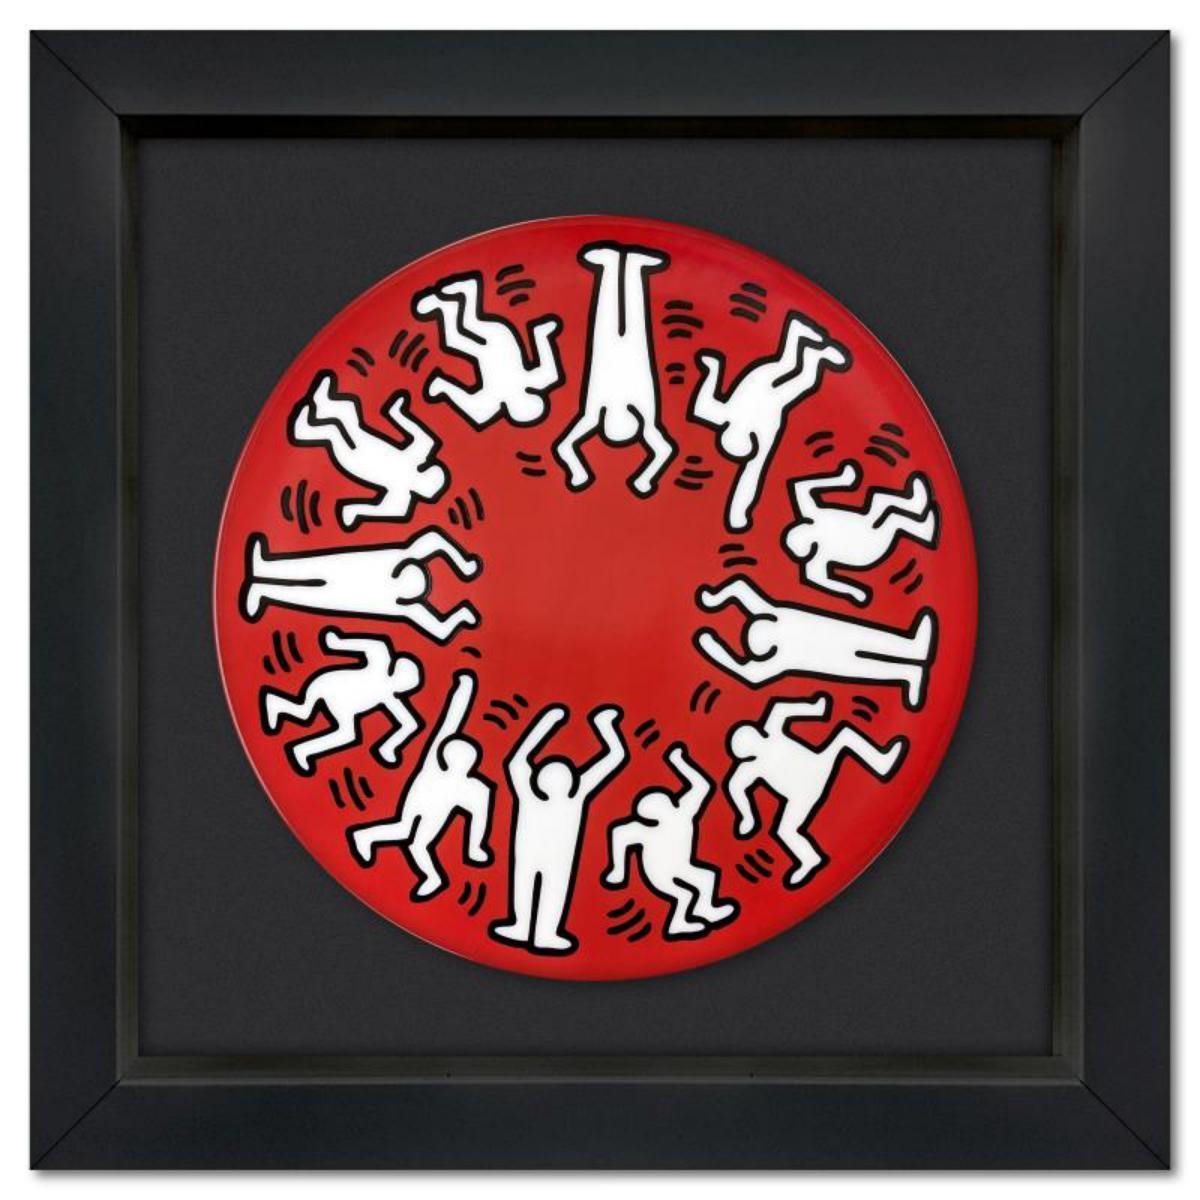 "White on Red" - Keith Haring